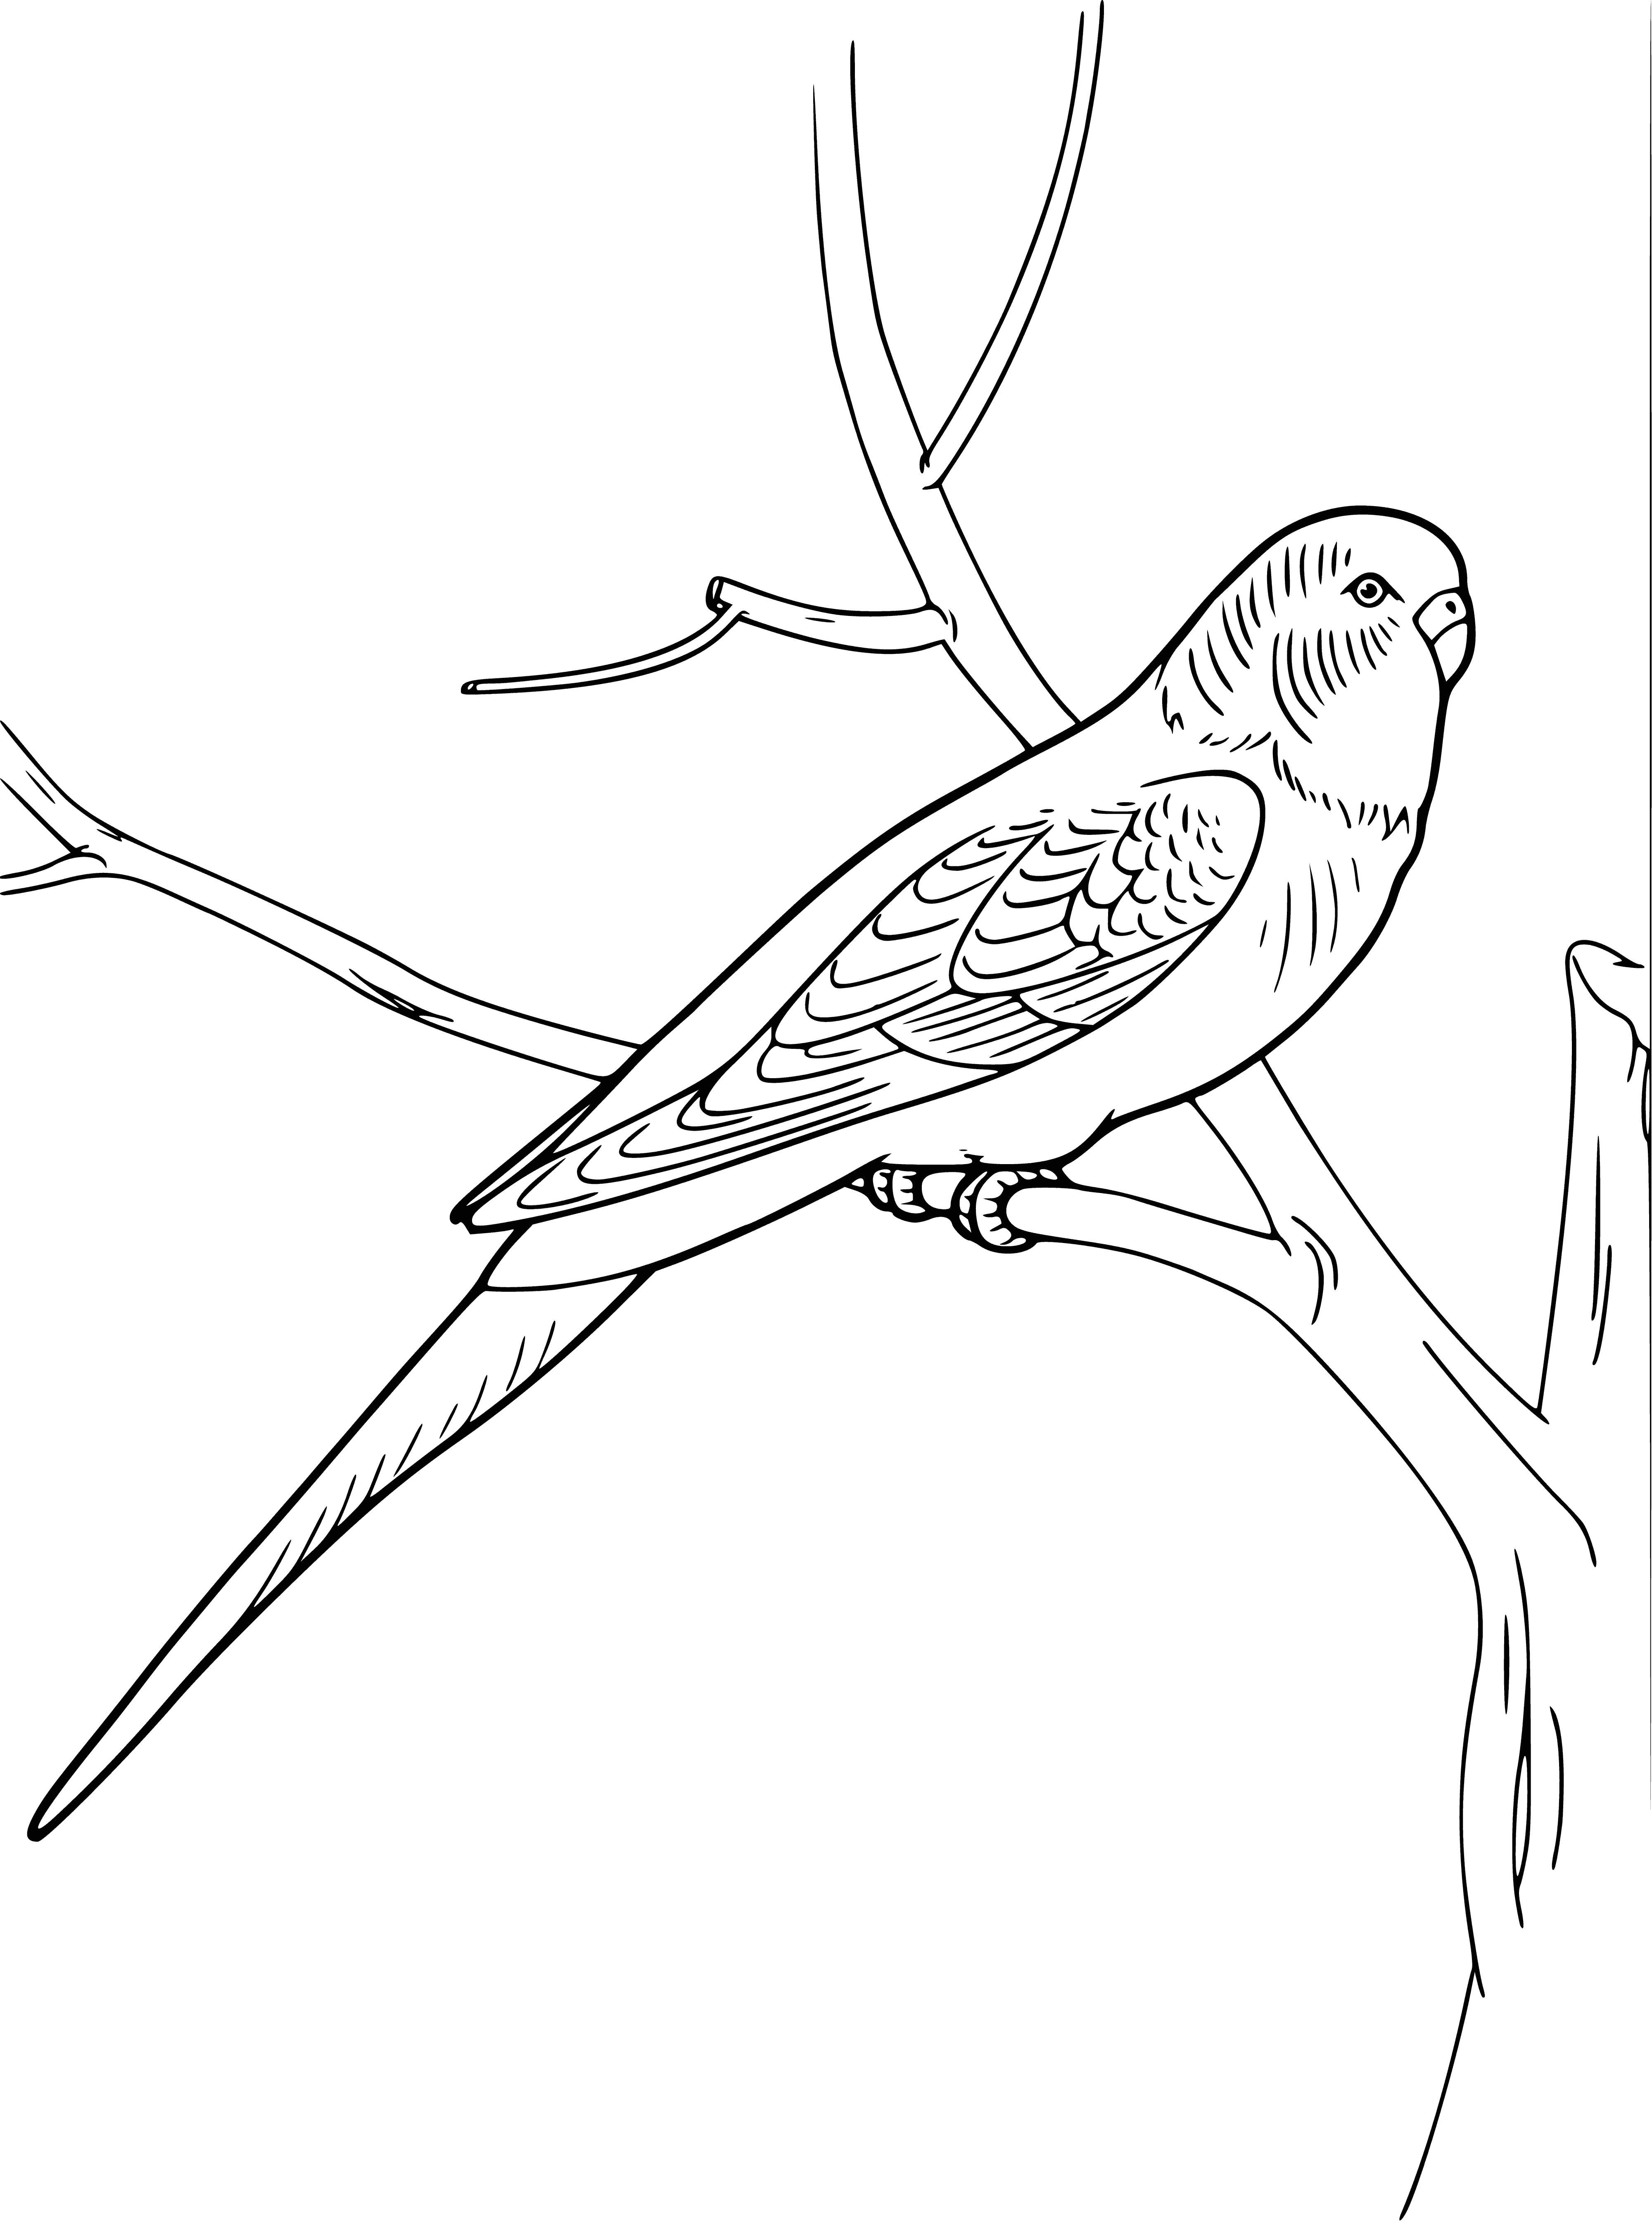 coloring page: Green parrot perched on branch, long tail, curved beak, yellow eyes, and red feathers on its head.